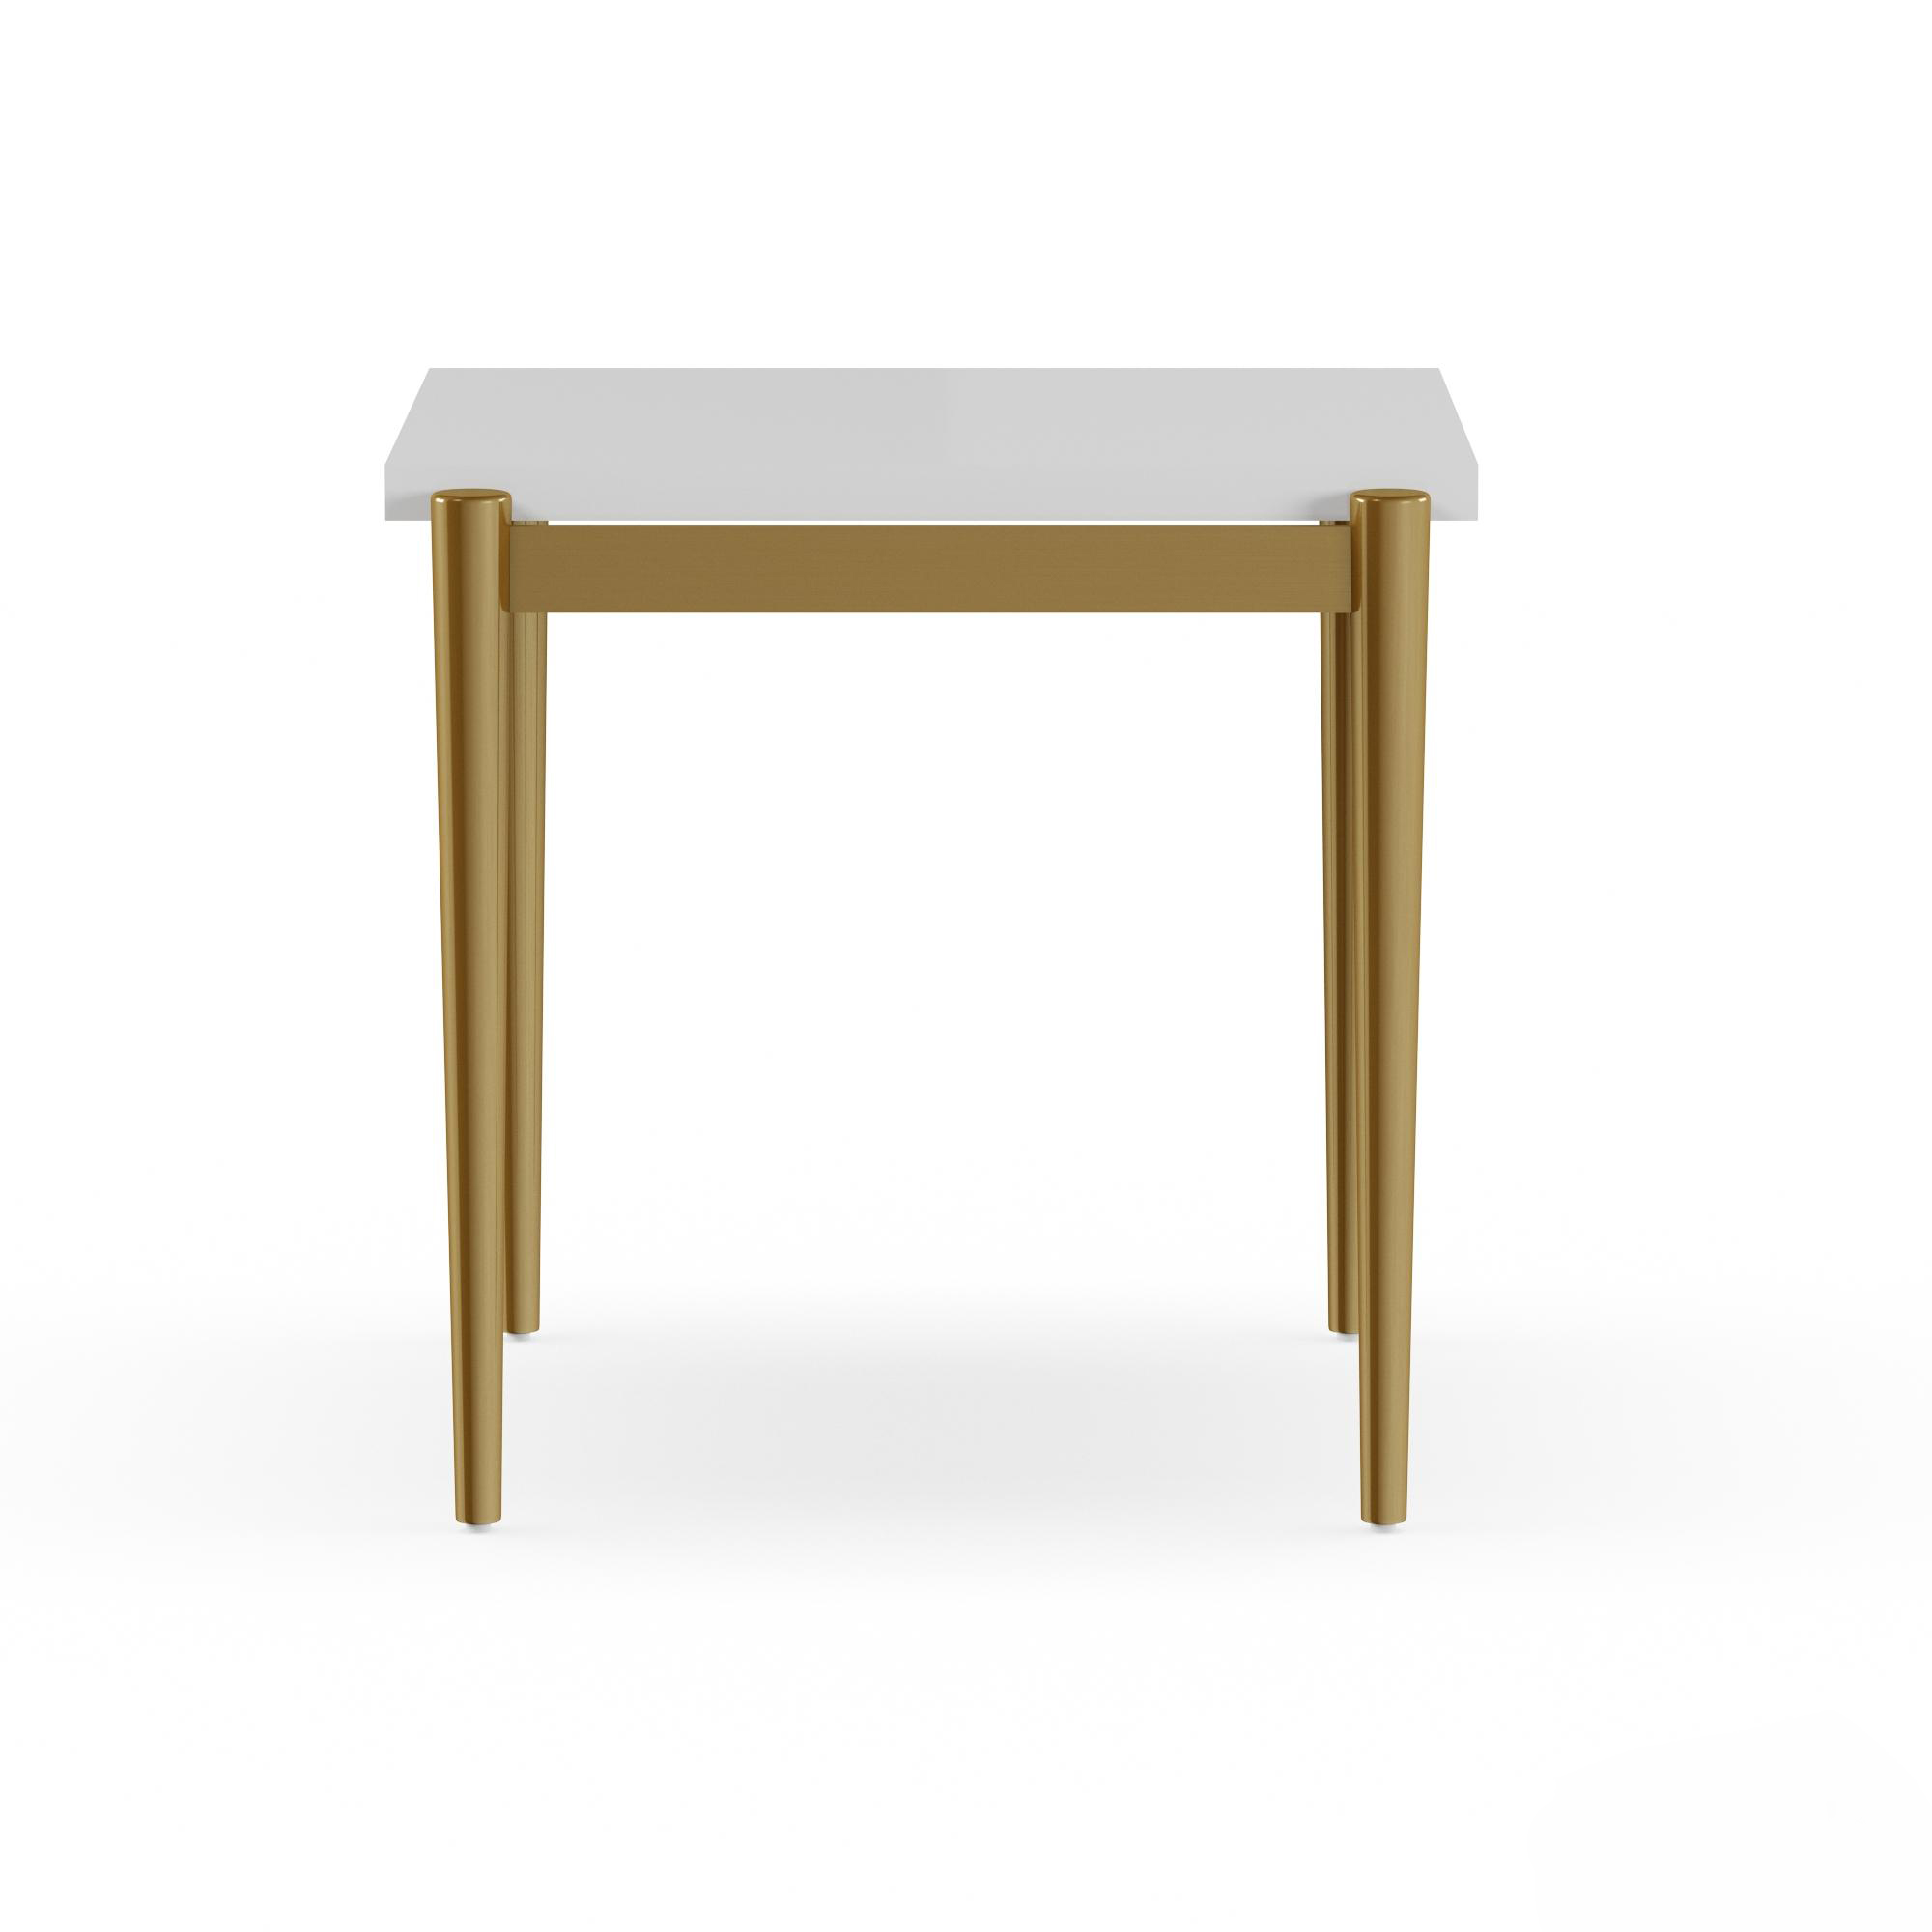 MoDRN Neo Luxury Dylan End Table - image 4 of 7